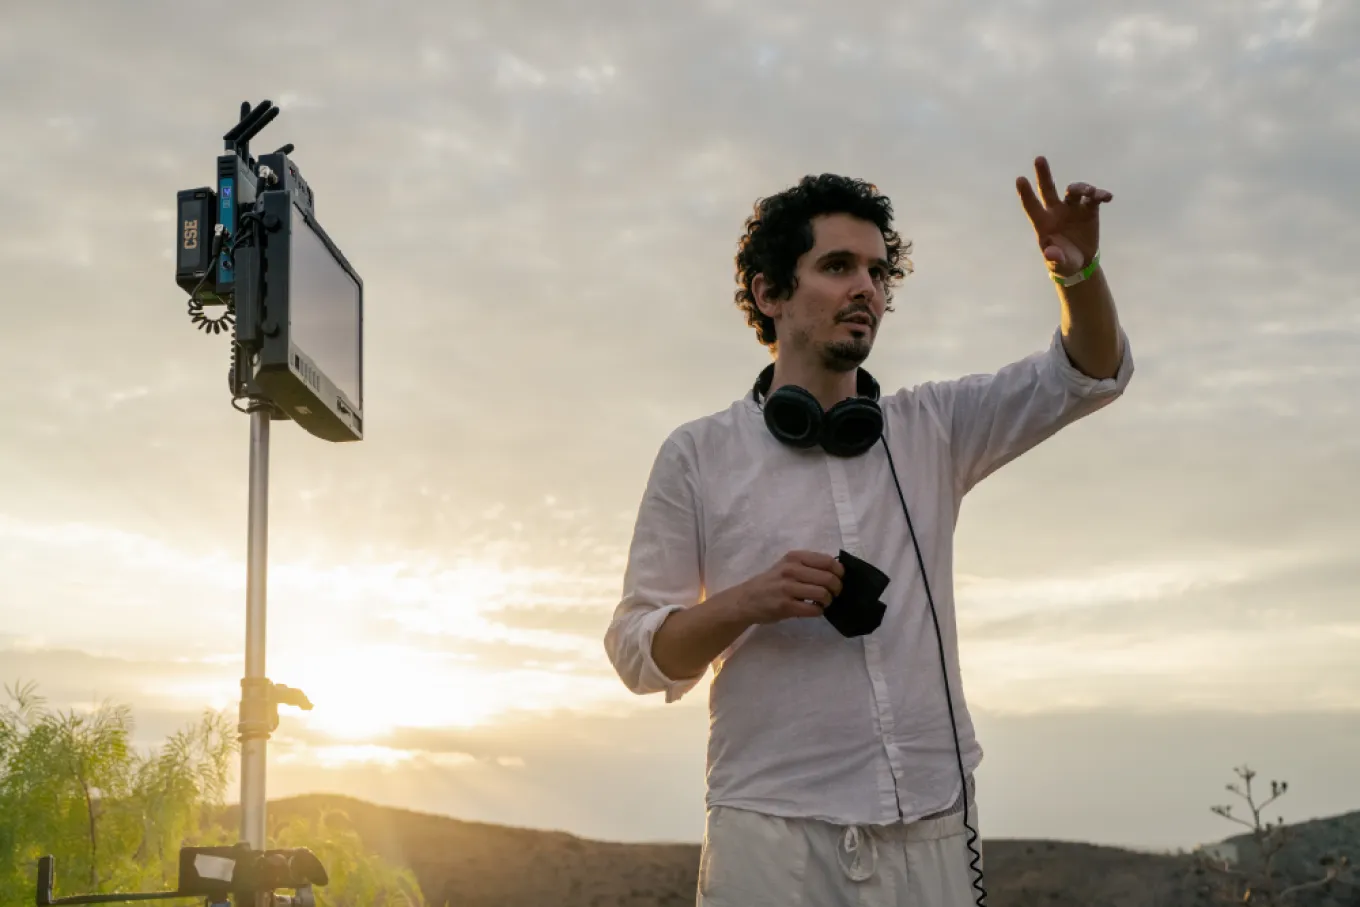 Damien Chazelle's Next Film To Begin Production In October